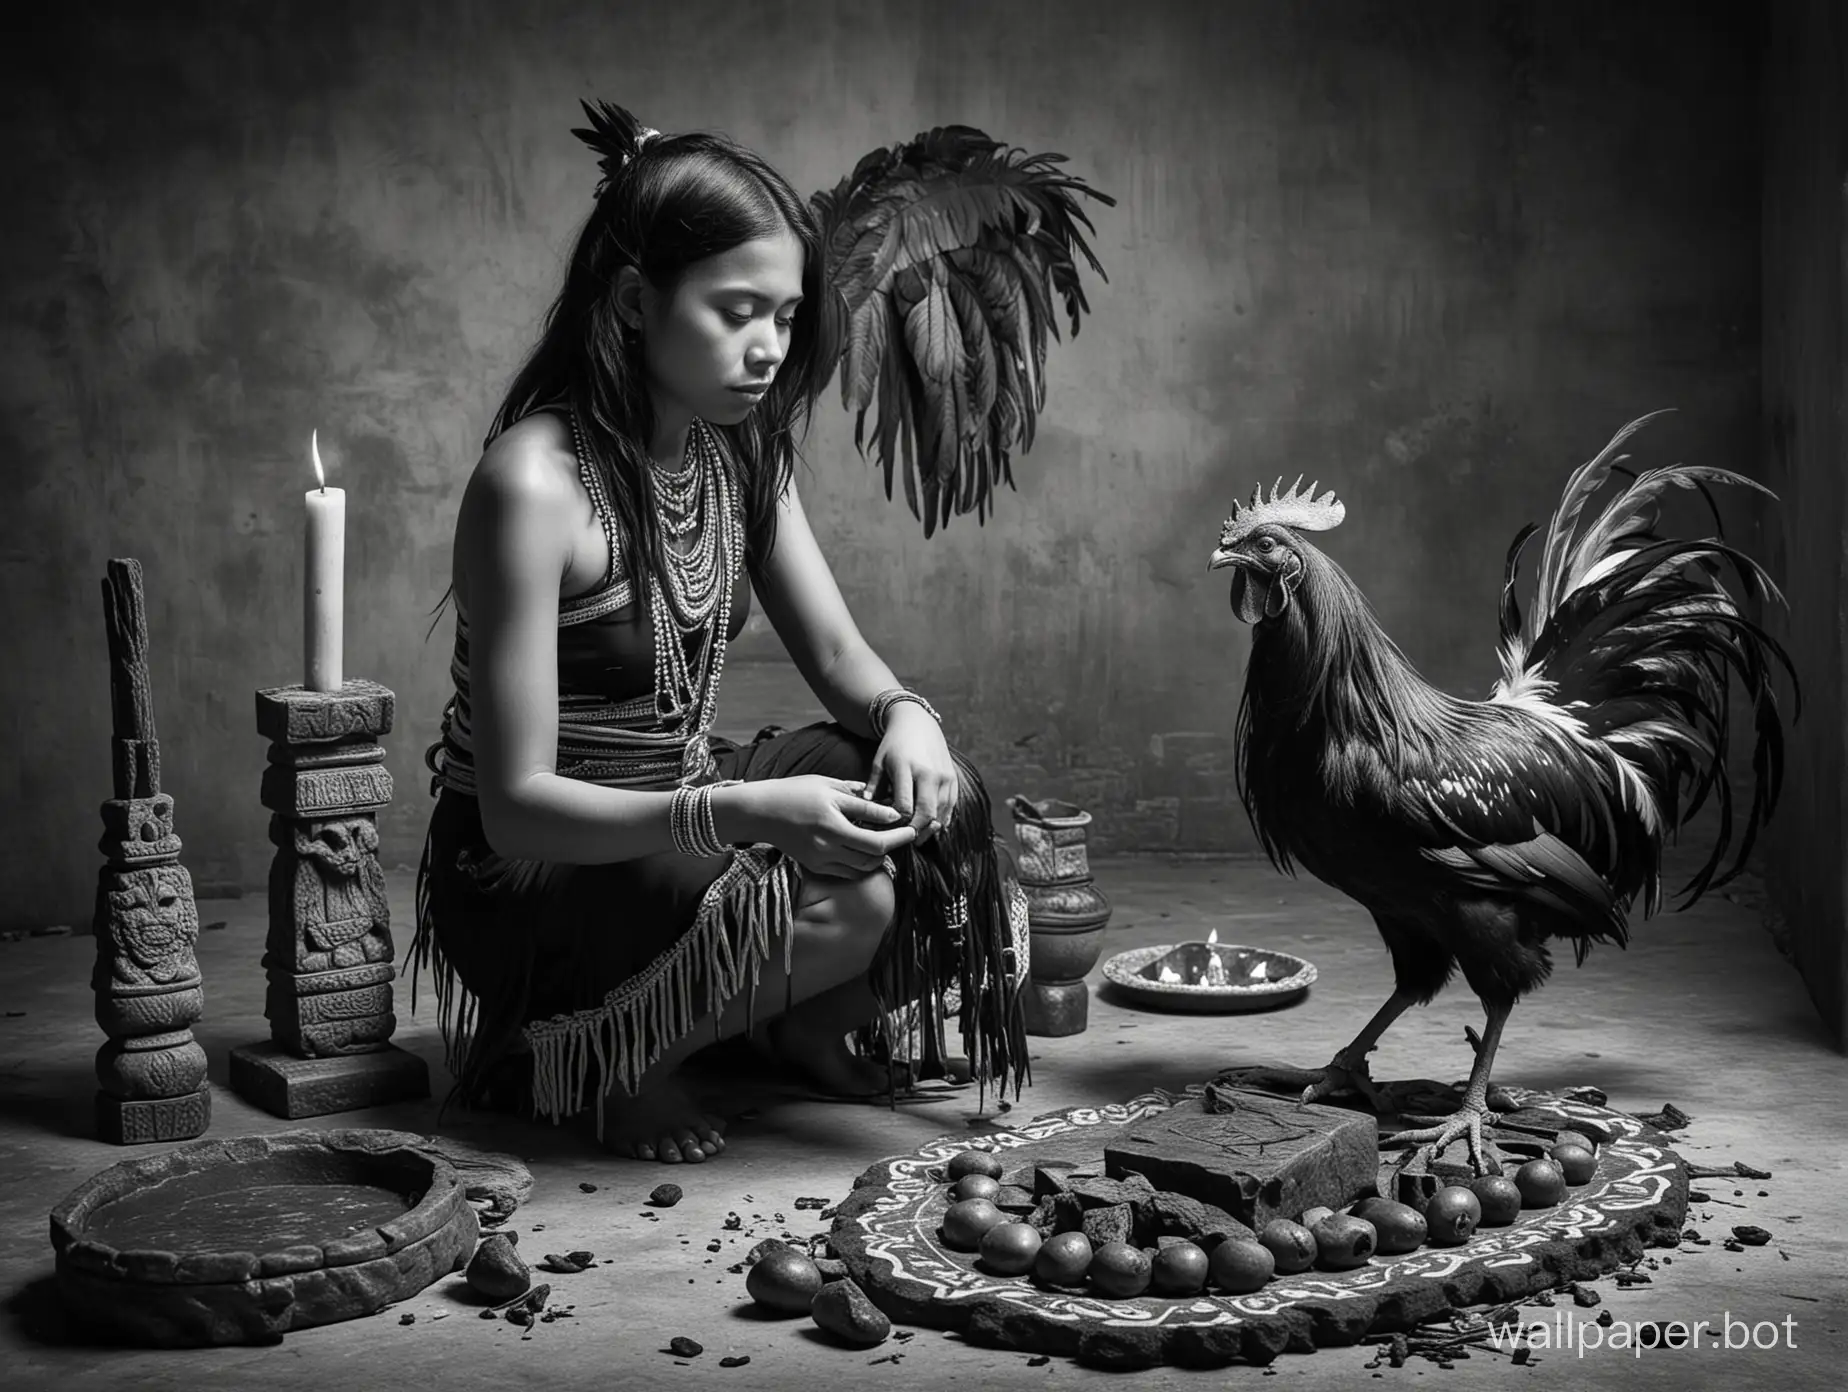 , sacrifice of a rooster, girl doing satanic ritual,Mayan Indian ,altar, doing ritual in,black and white photography, high contrast photography, sharp super contrast

